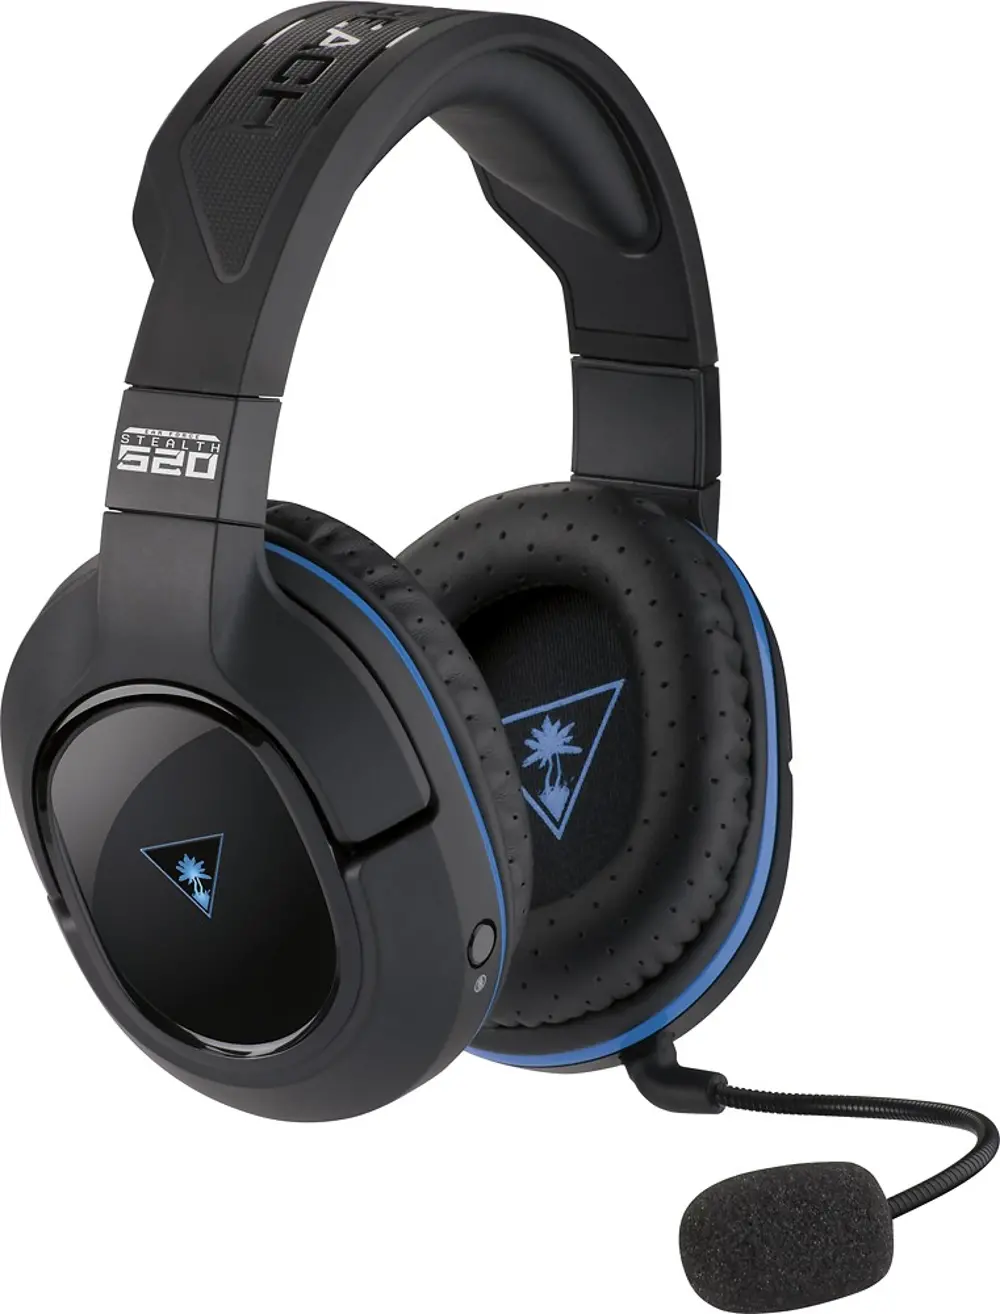 TBS 2670-01 Turtle Beach Ear Force Stealth 520 Wireless DTS 7.1 Surround Sound Gaming Headset-1